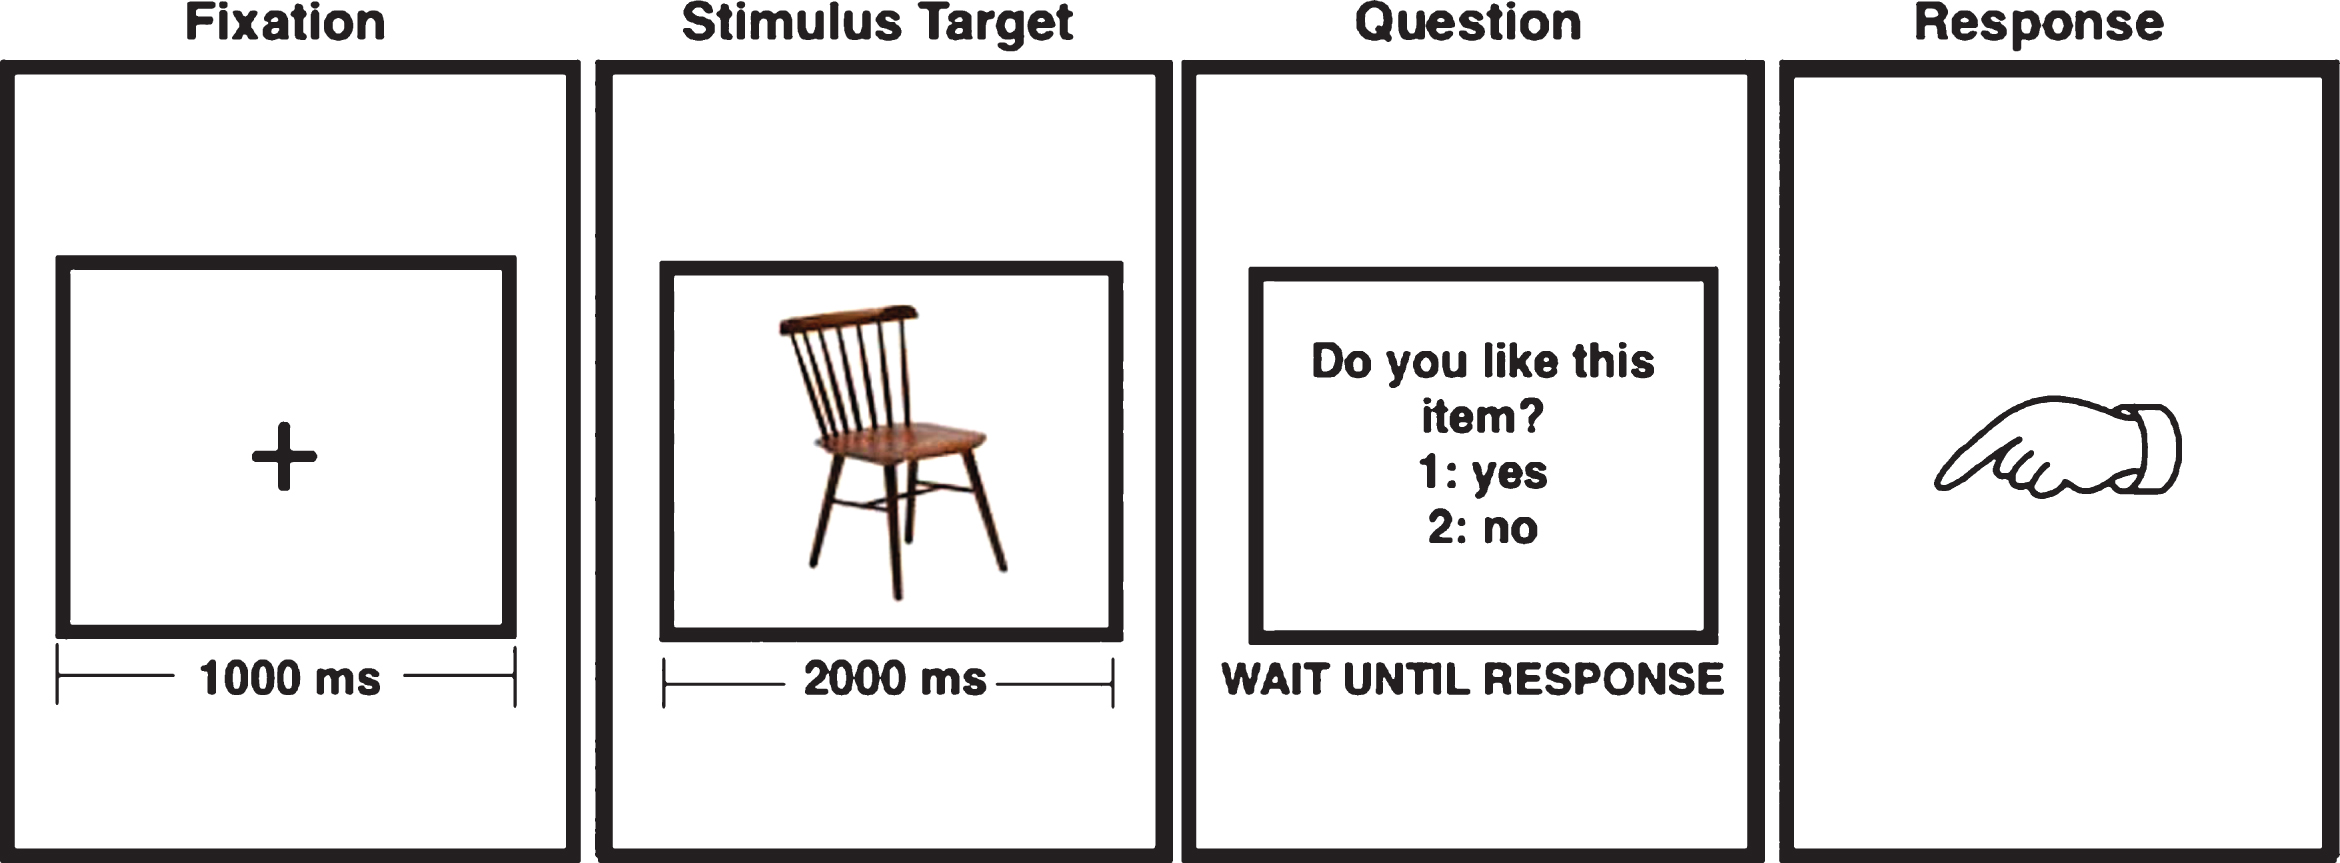 Sequence of stimulus used during the encoding paradigm. During “fixation” the participant look at the cross in the screen and during the “stimulus target” the subject tries to memorize the object.